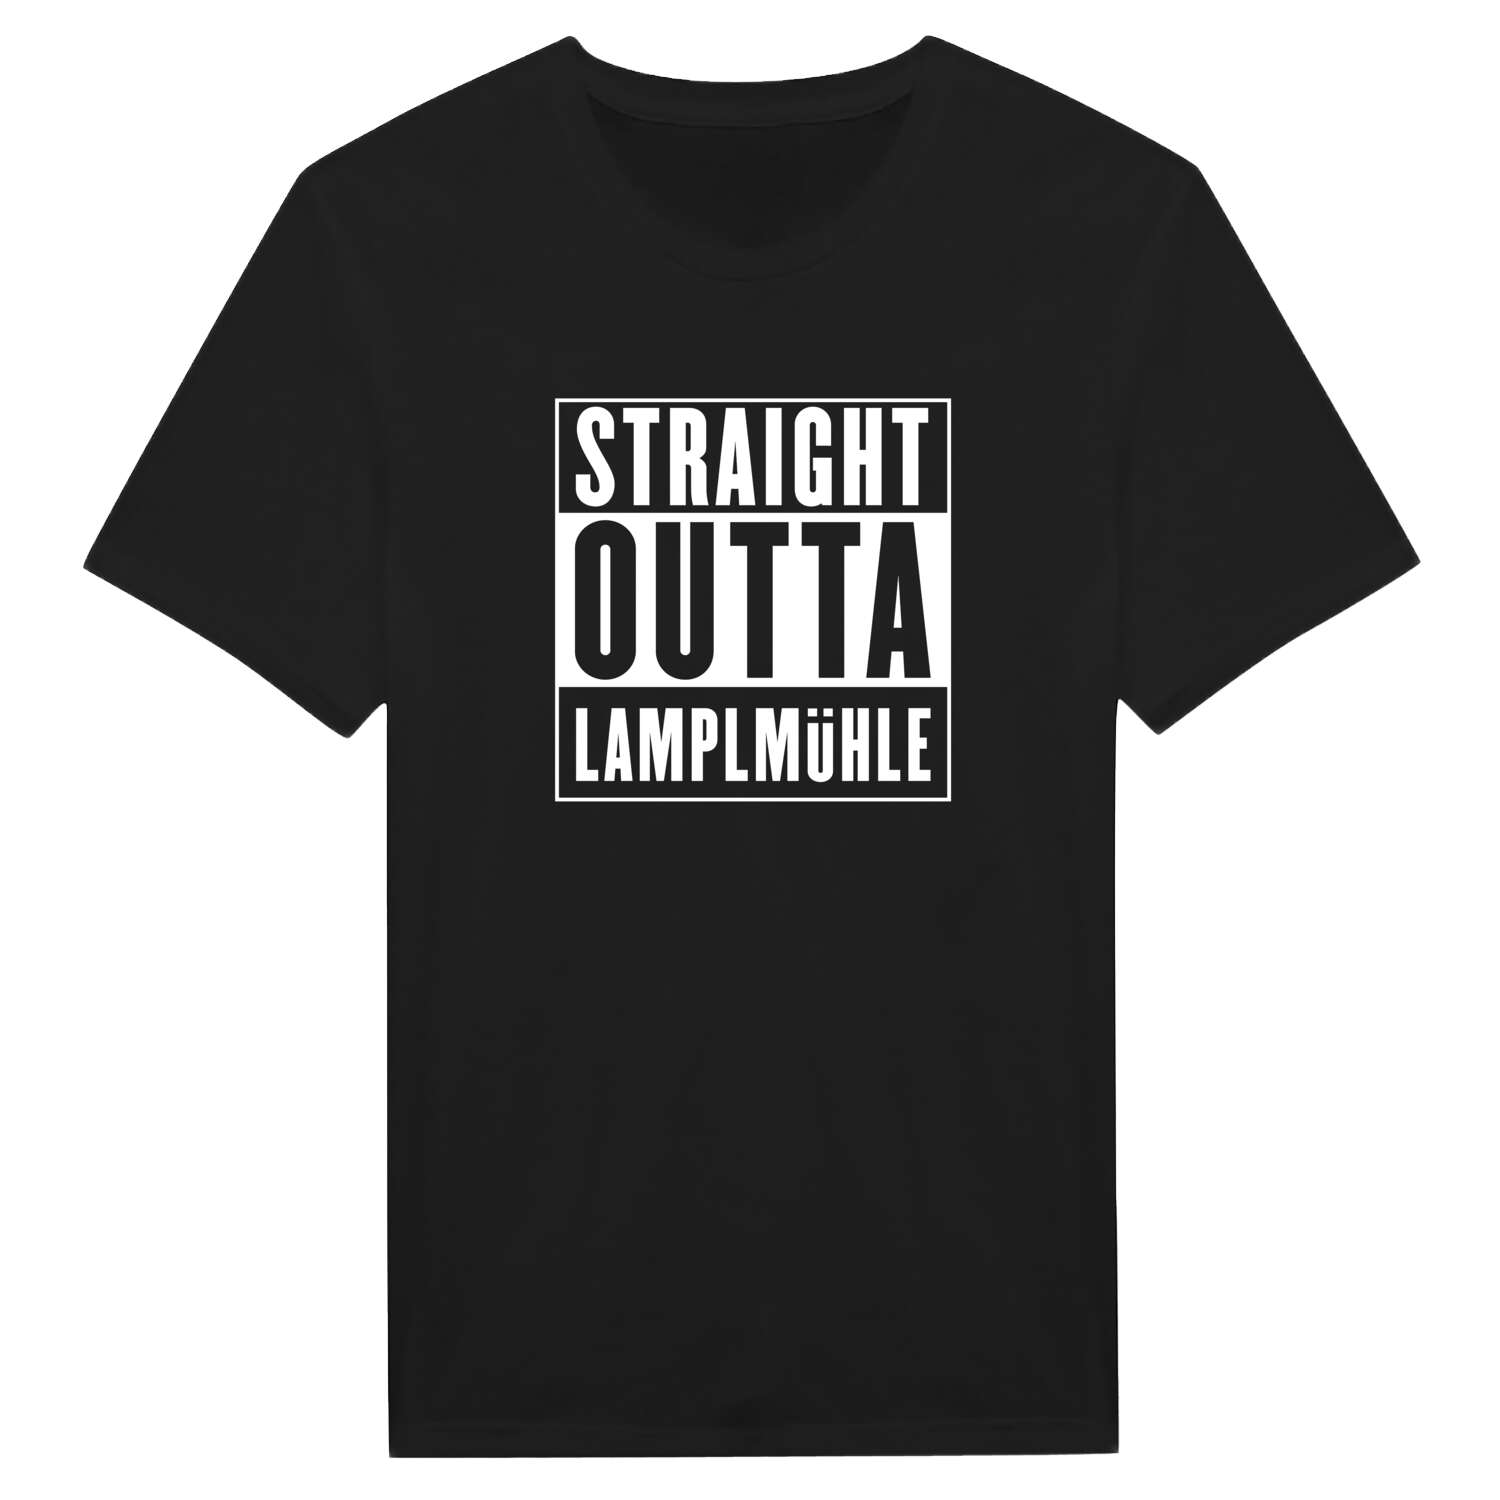 Lamplmühle T-Shirt »Straight Outta«